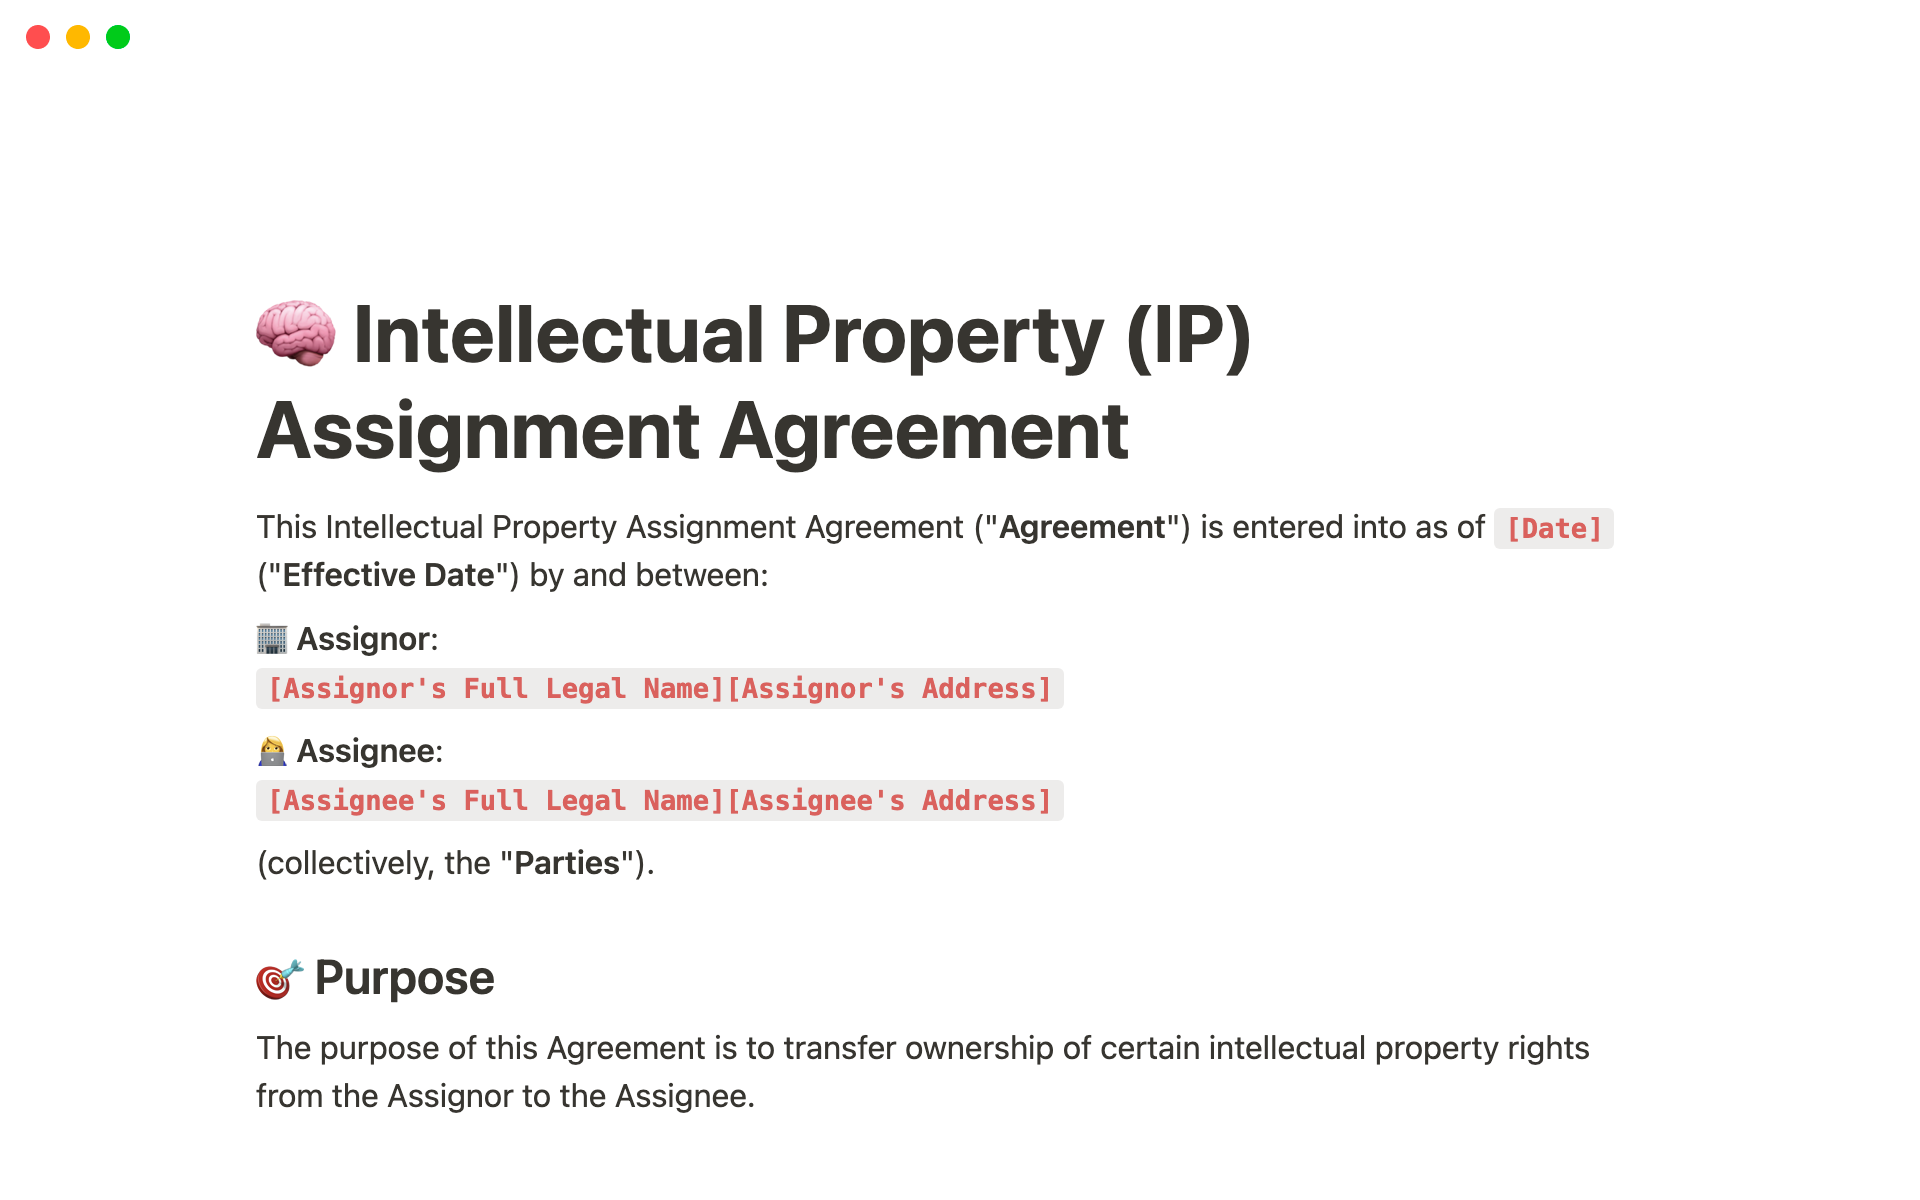 This Intellectual Property (IP) Assignment Agreement template provides a comprehensive outline of terms for transferring ownership of intellectual property rights.